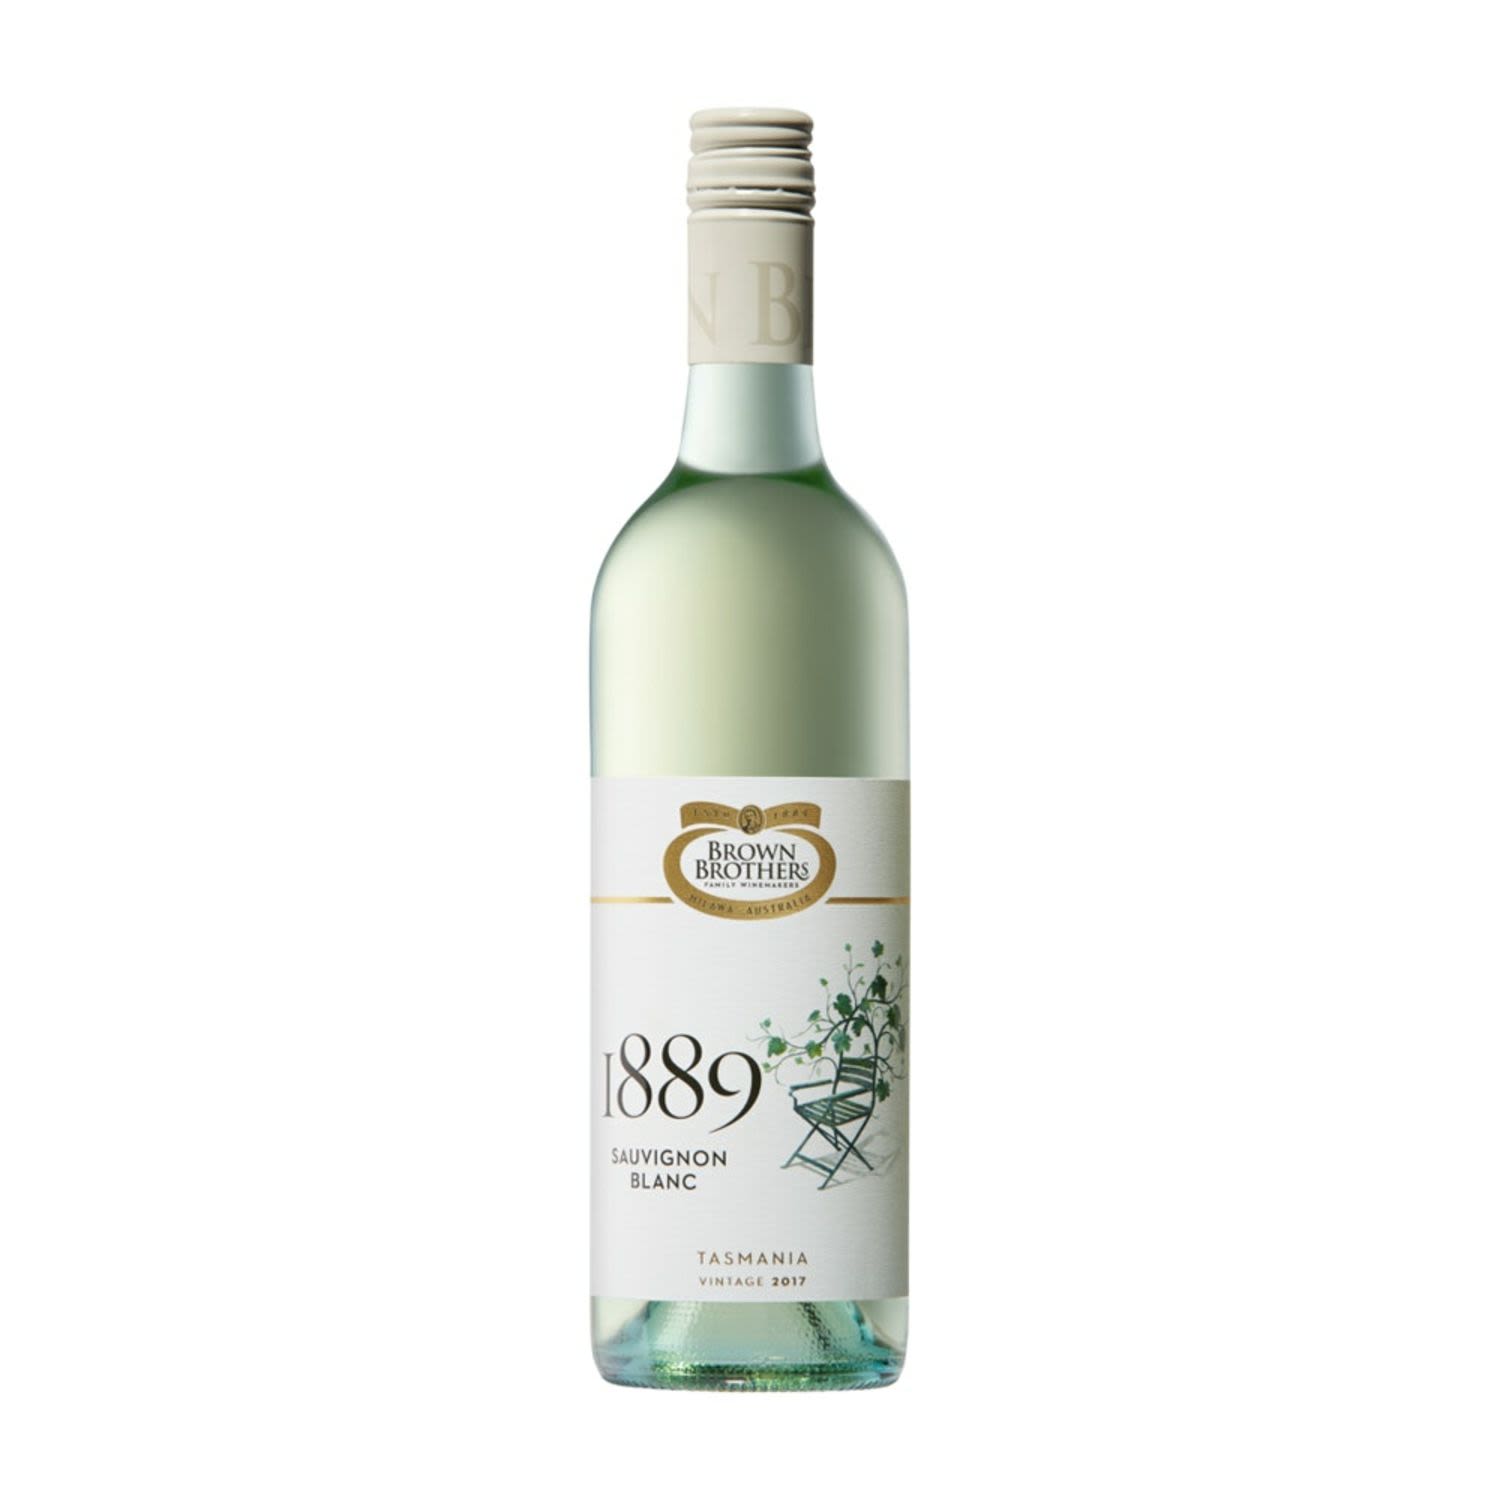 Refreshing tropical fruit flavours, racy acidity and a zesty finish. The 1889 Sauvignon Blanc is sourced entirely from our Tasmanian vineyards. This refreshing wine is true in style to its cool-climate origin and is best consumed when young and fresh.<br /> <br />Alcohol Volume: 13.50%<br /><br />Pack Format: Bottle<br /><br />Standard Drinks: 8<br /><br />Pack Type: Bottle<br /><br />Country of Origin: Australia<br /><br />Region: Tasmania<br /><br />Vintage: Vintages Vary<br />